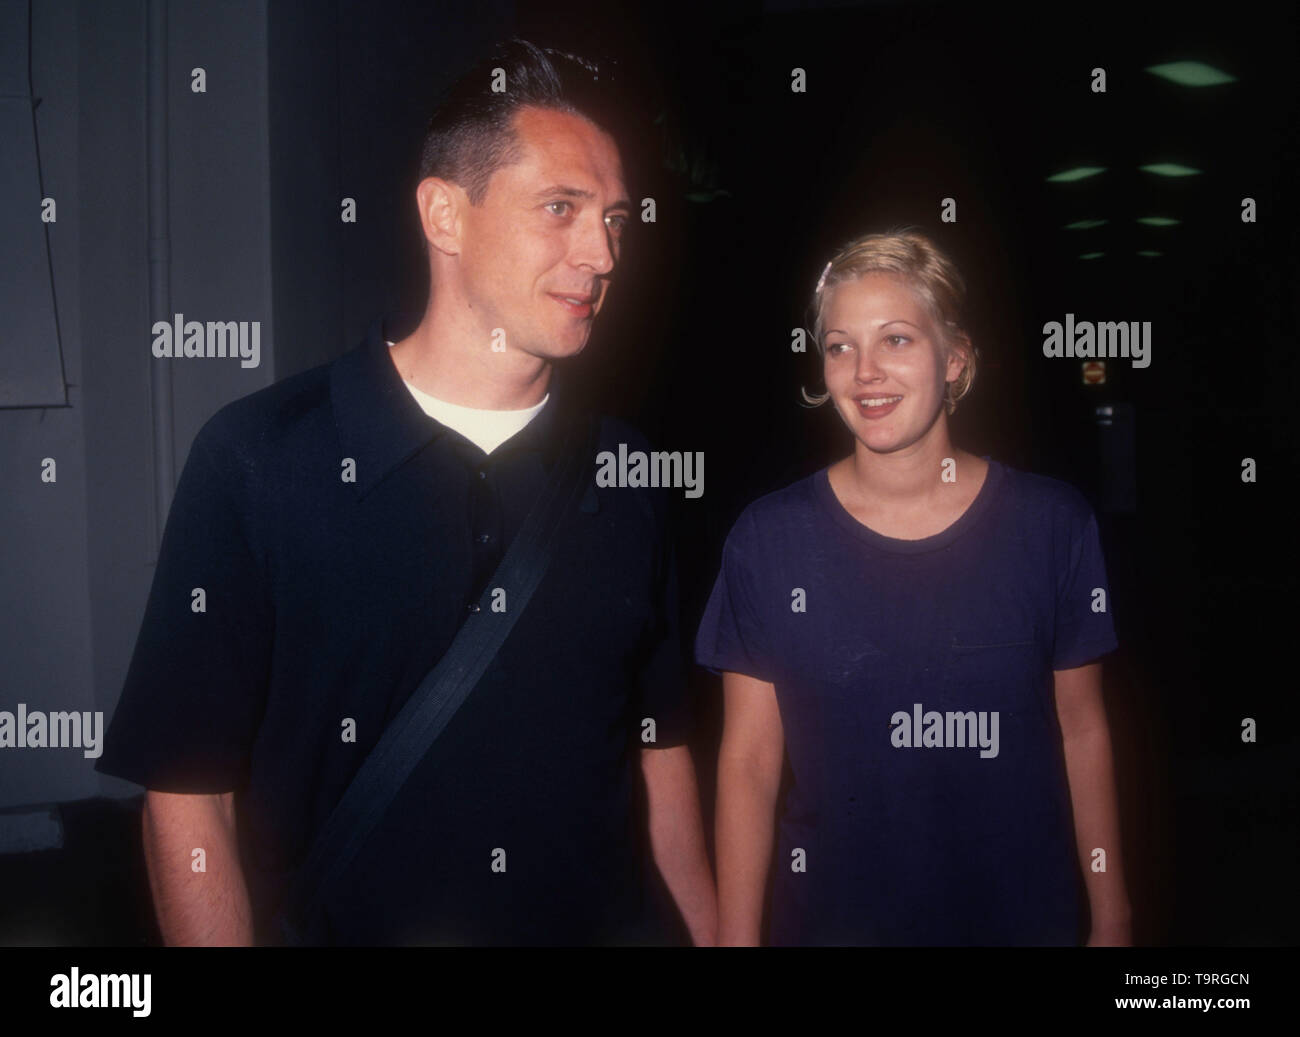 Los Angeles, California, USA 19th April 1994 Actress Drew Barrymore and husband Jeremy Thomas attend 20th Century Fox' 'Bad Girls' Premiere on April 19, 1994 in Los Angeles, California, USA. Photo by Barry King/Alamy Stock Photo Stock Photo